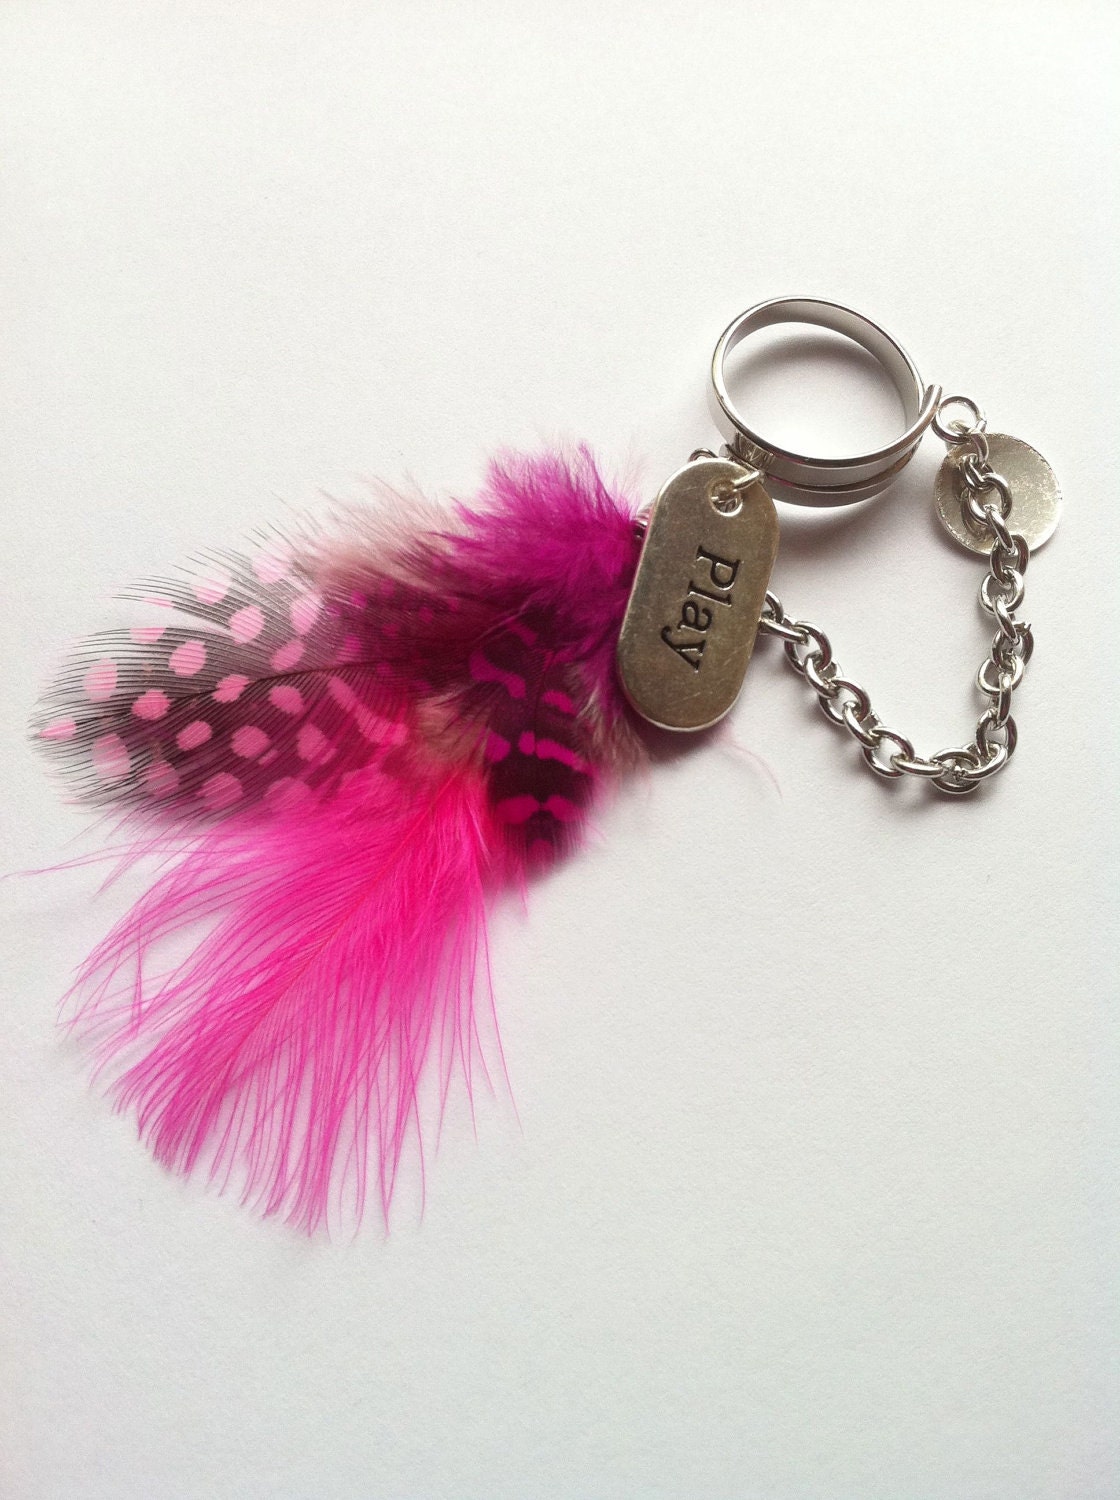 Silver Play Charm Ring with Pink Feathers - ivolvebeauty